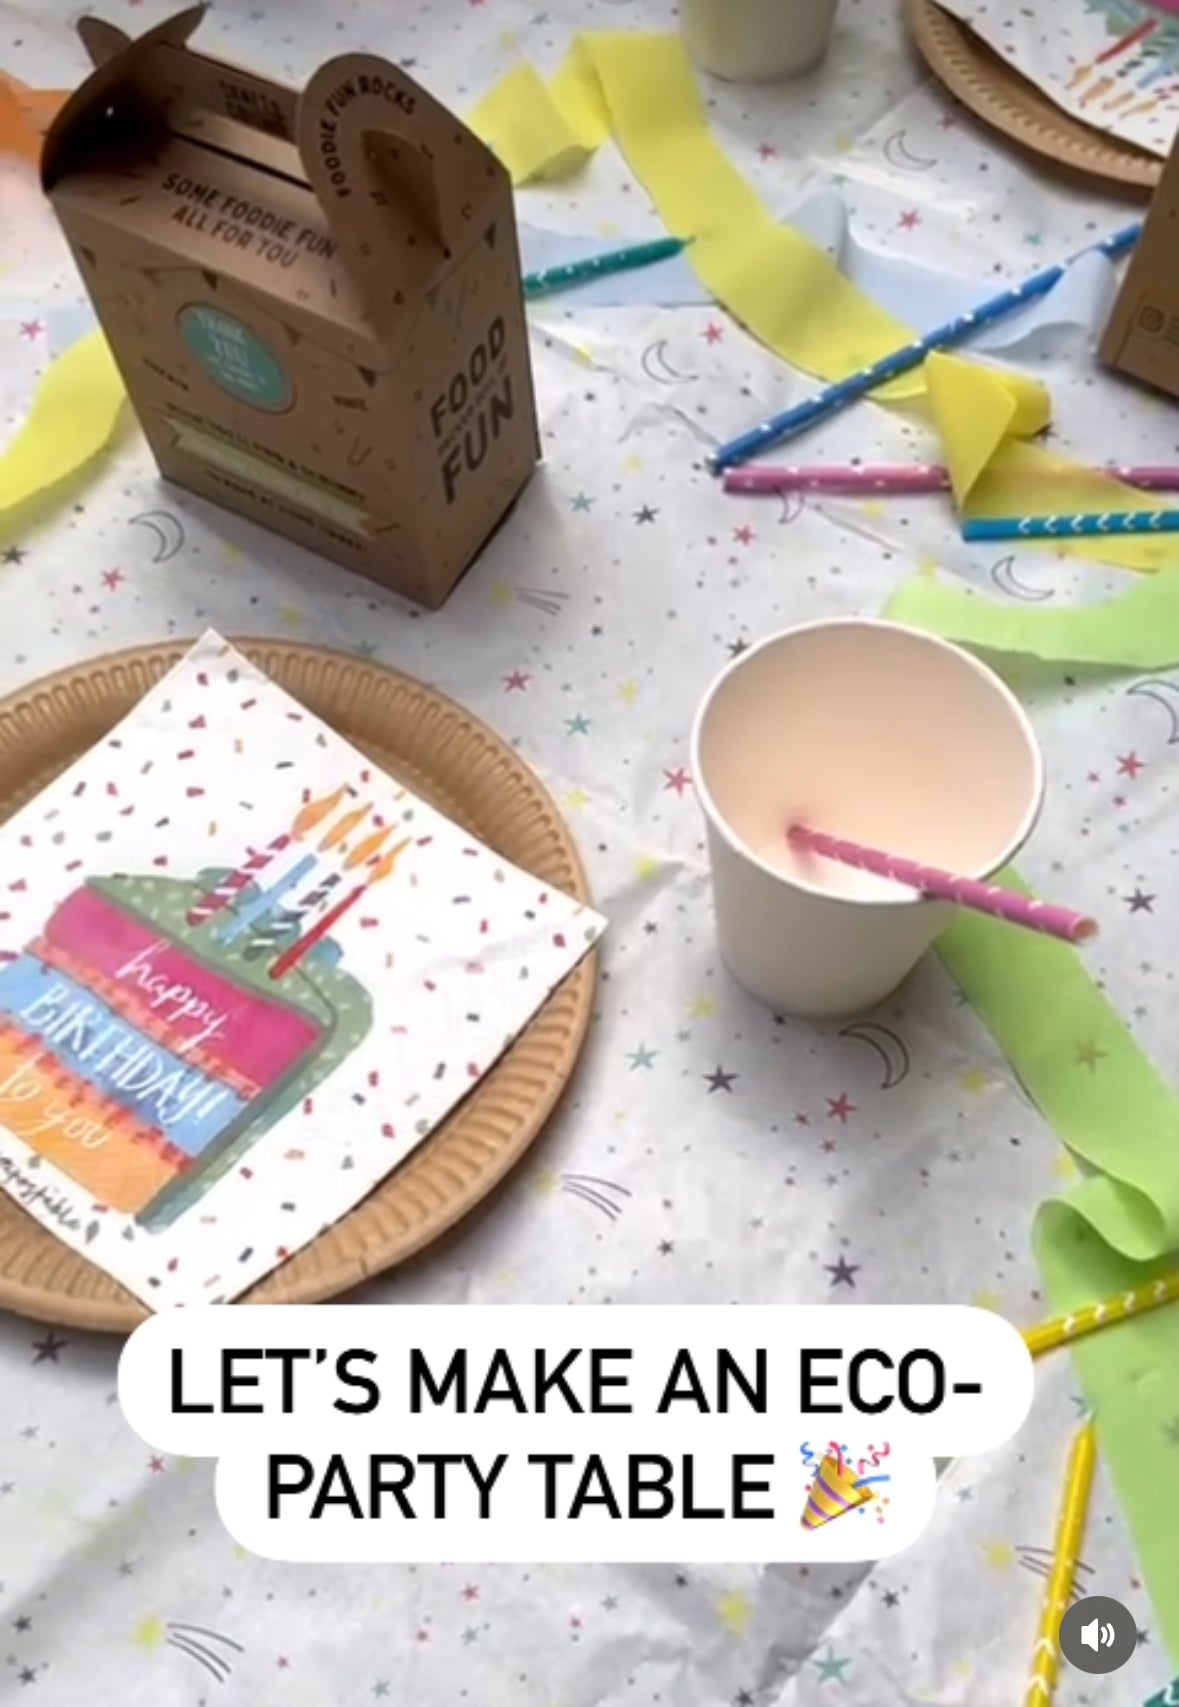 Our tips for laying the best eco-friendly party table